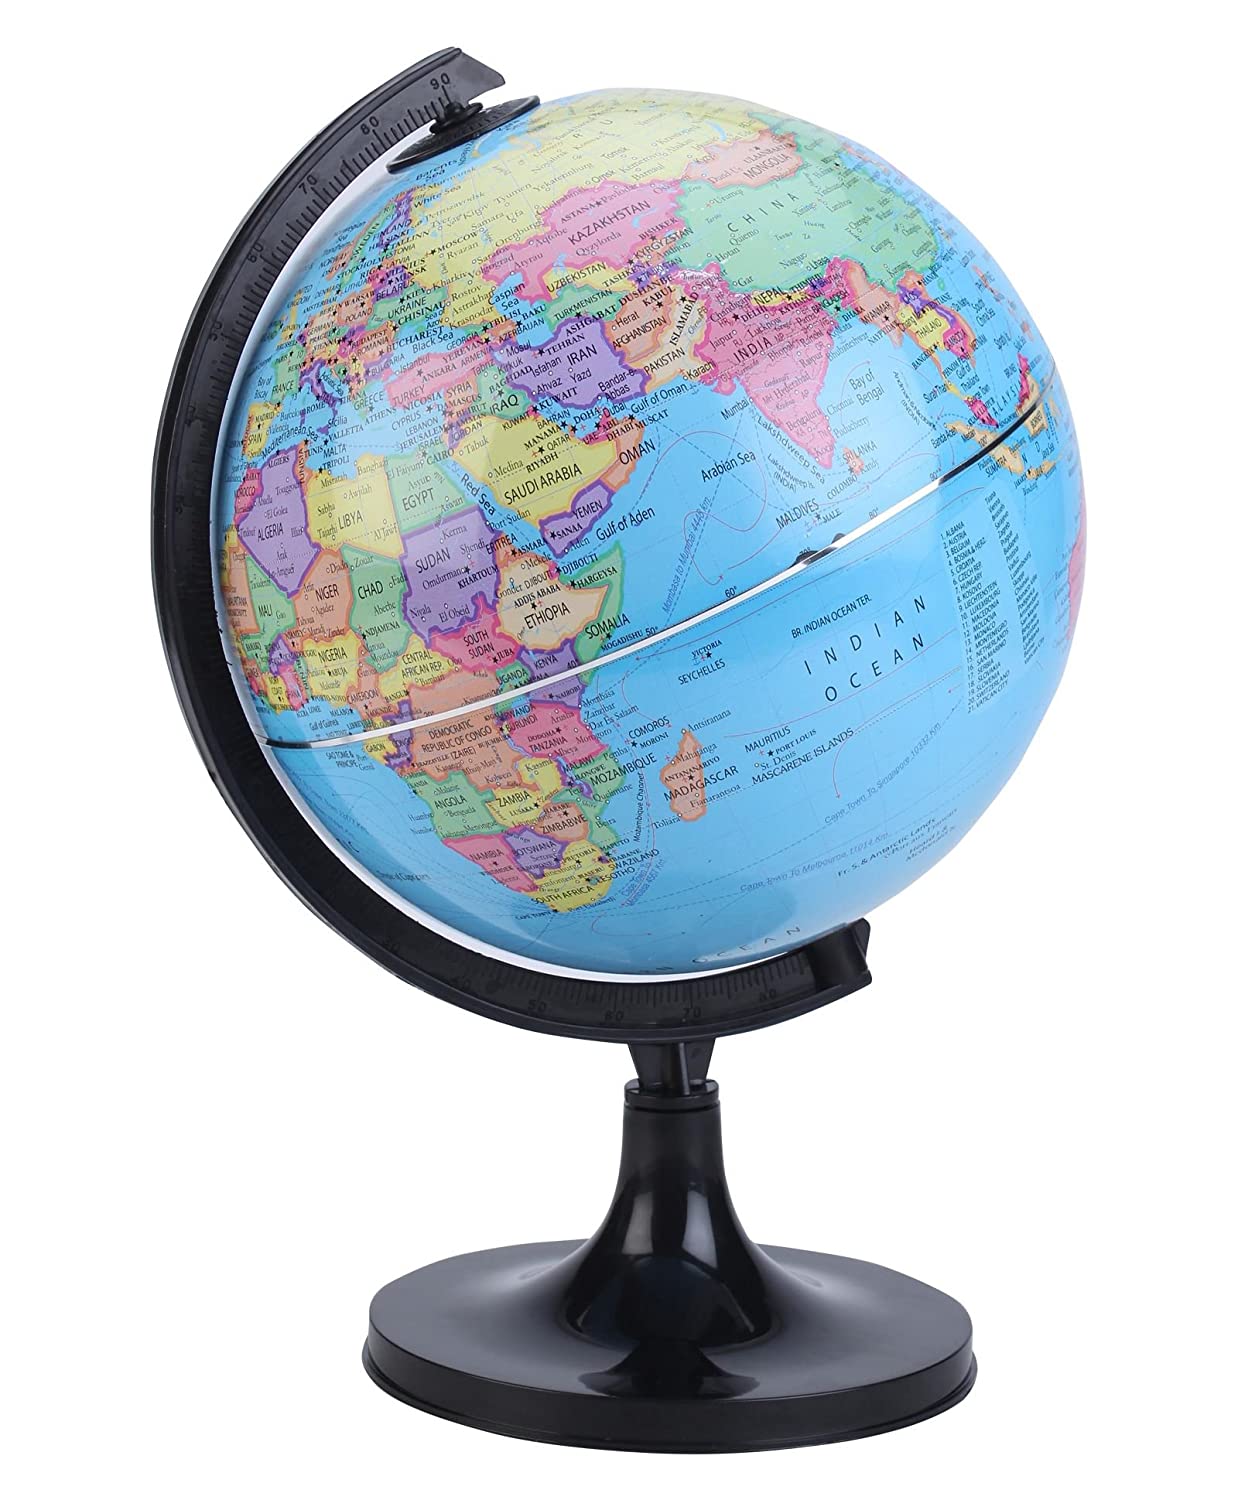 Winners Ornate 808 Political World Globe, Black Stand, 20cm Dia, 62.8cm Circ., Scratch-Resistant, Survey of India Approved, for Home, School & Gifts